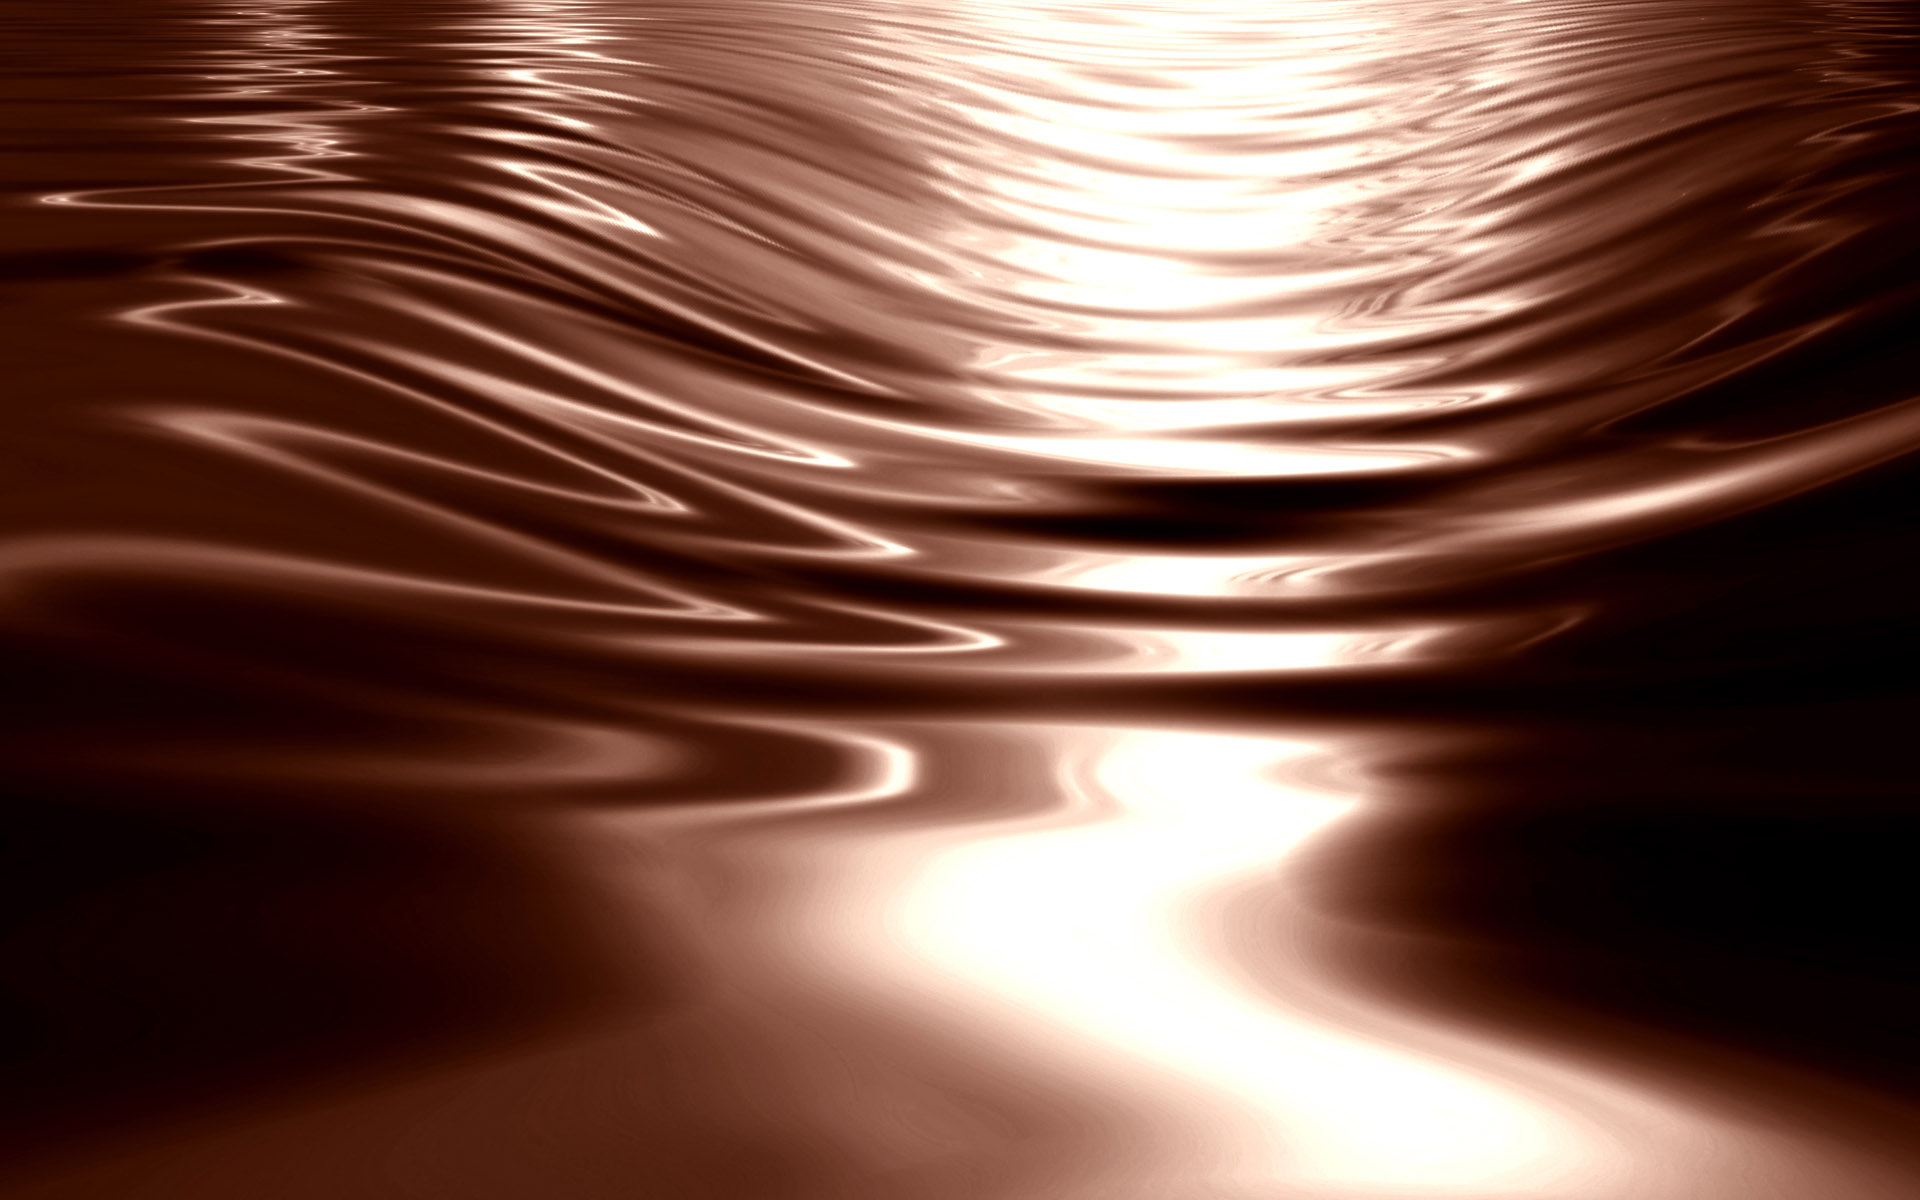 HD Melted Chocolate Wallpaper for Desktop Full Size ...